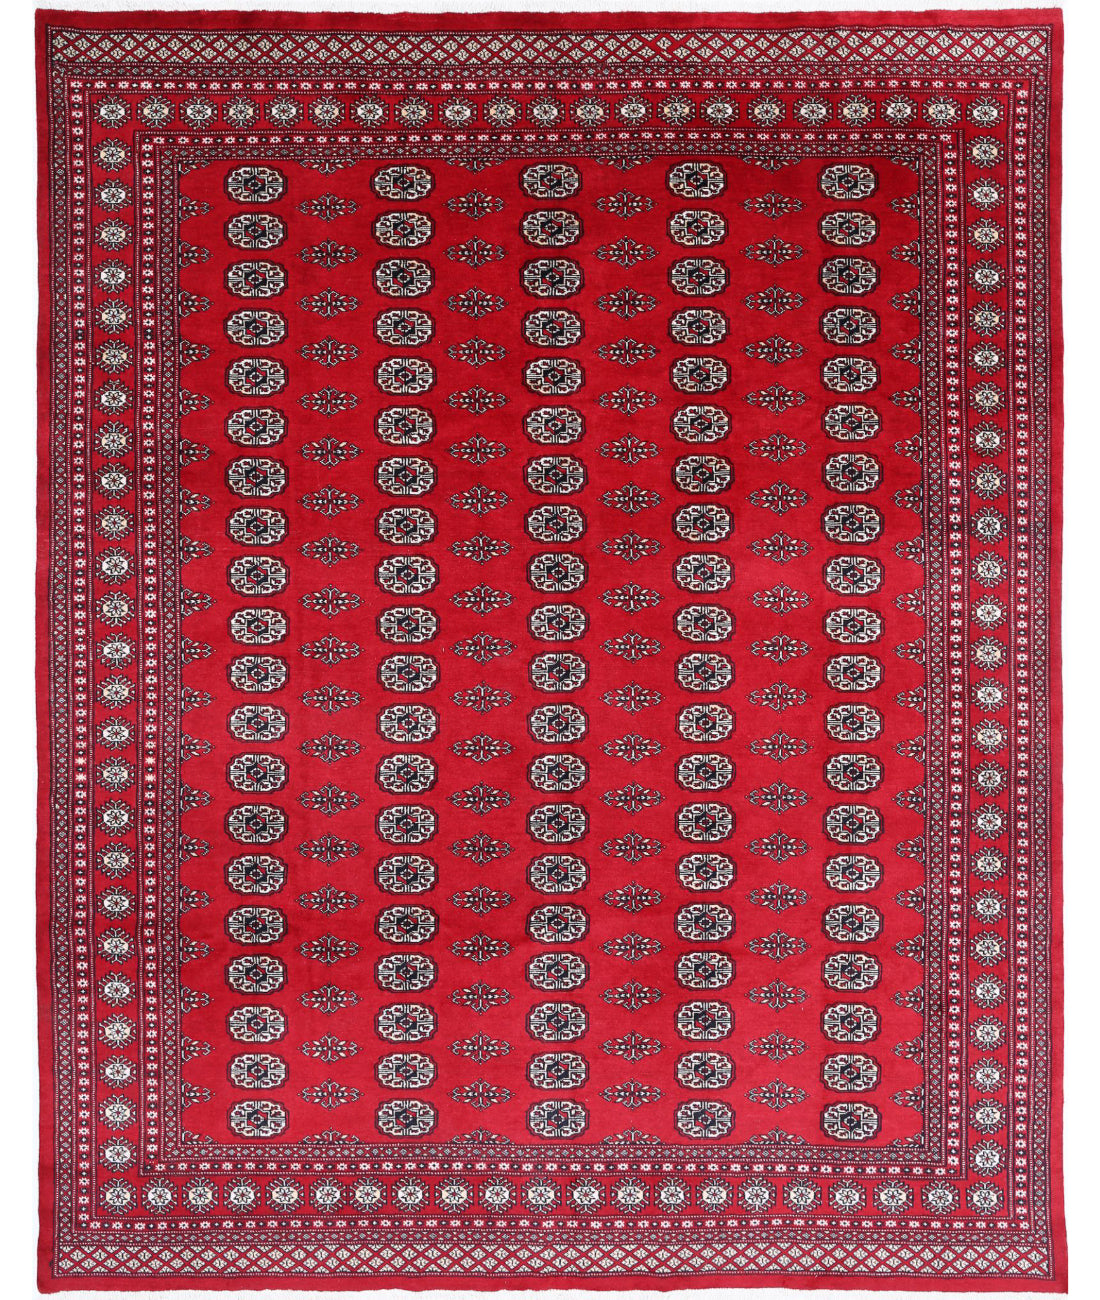 Hand Knotted Tribal Bokhara Wool Rug - 7&#39;10&#39;&#39; x 9&#39;11&#39;&#39; 7&#39;10&#39;&#39; x 9&#39;11&#39;&#39; (235 X 298) / Red / Beige